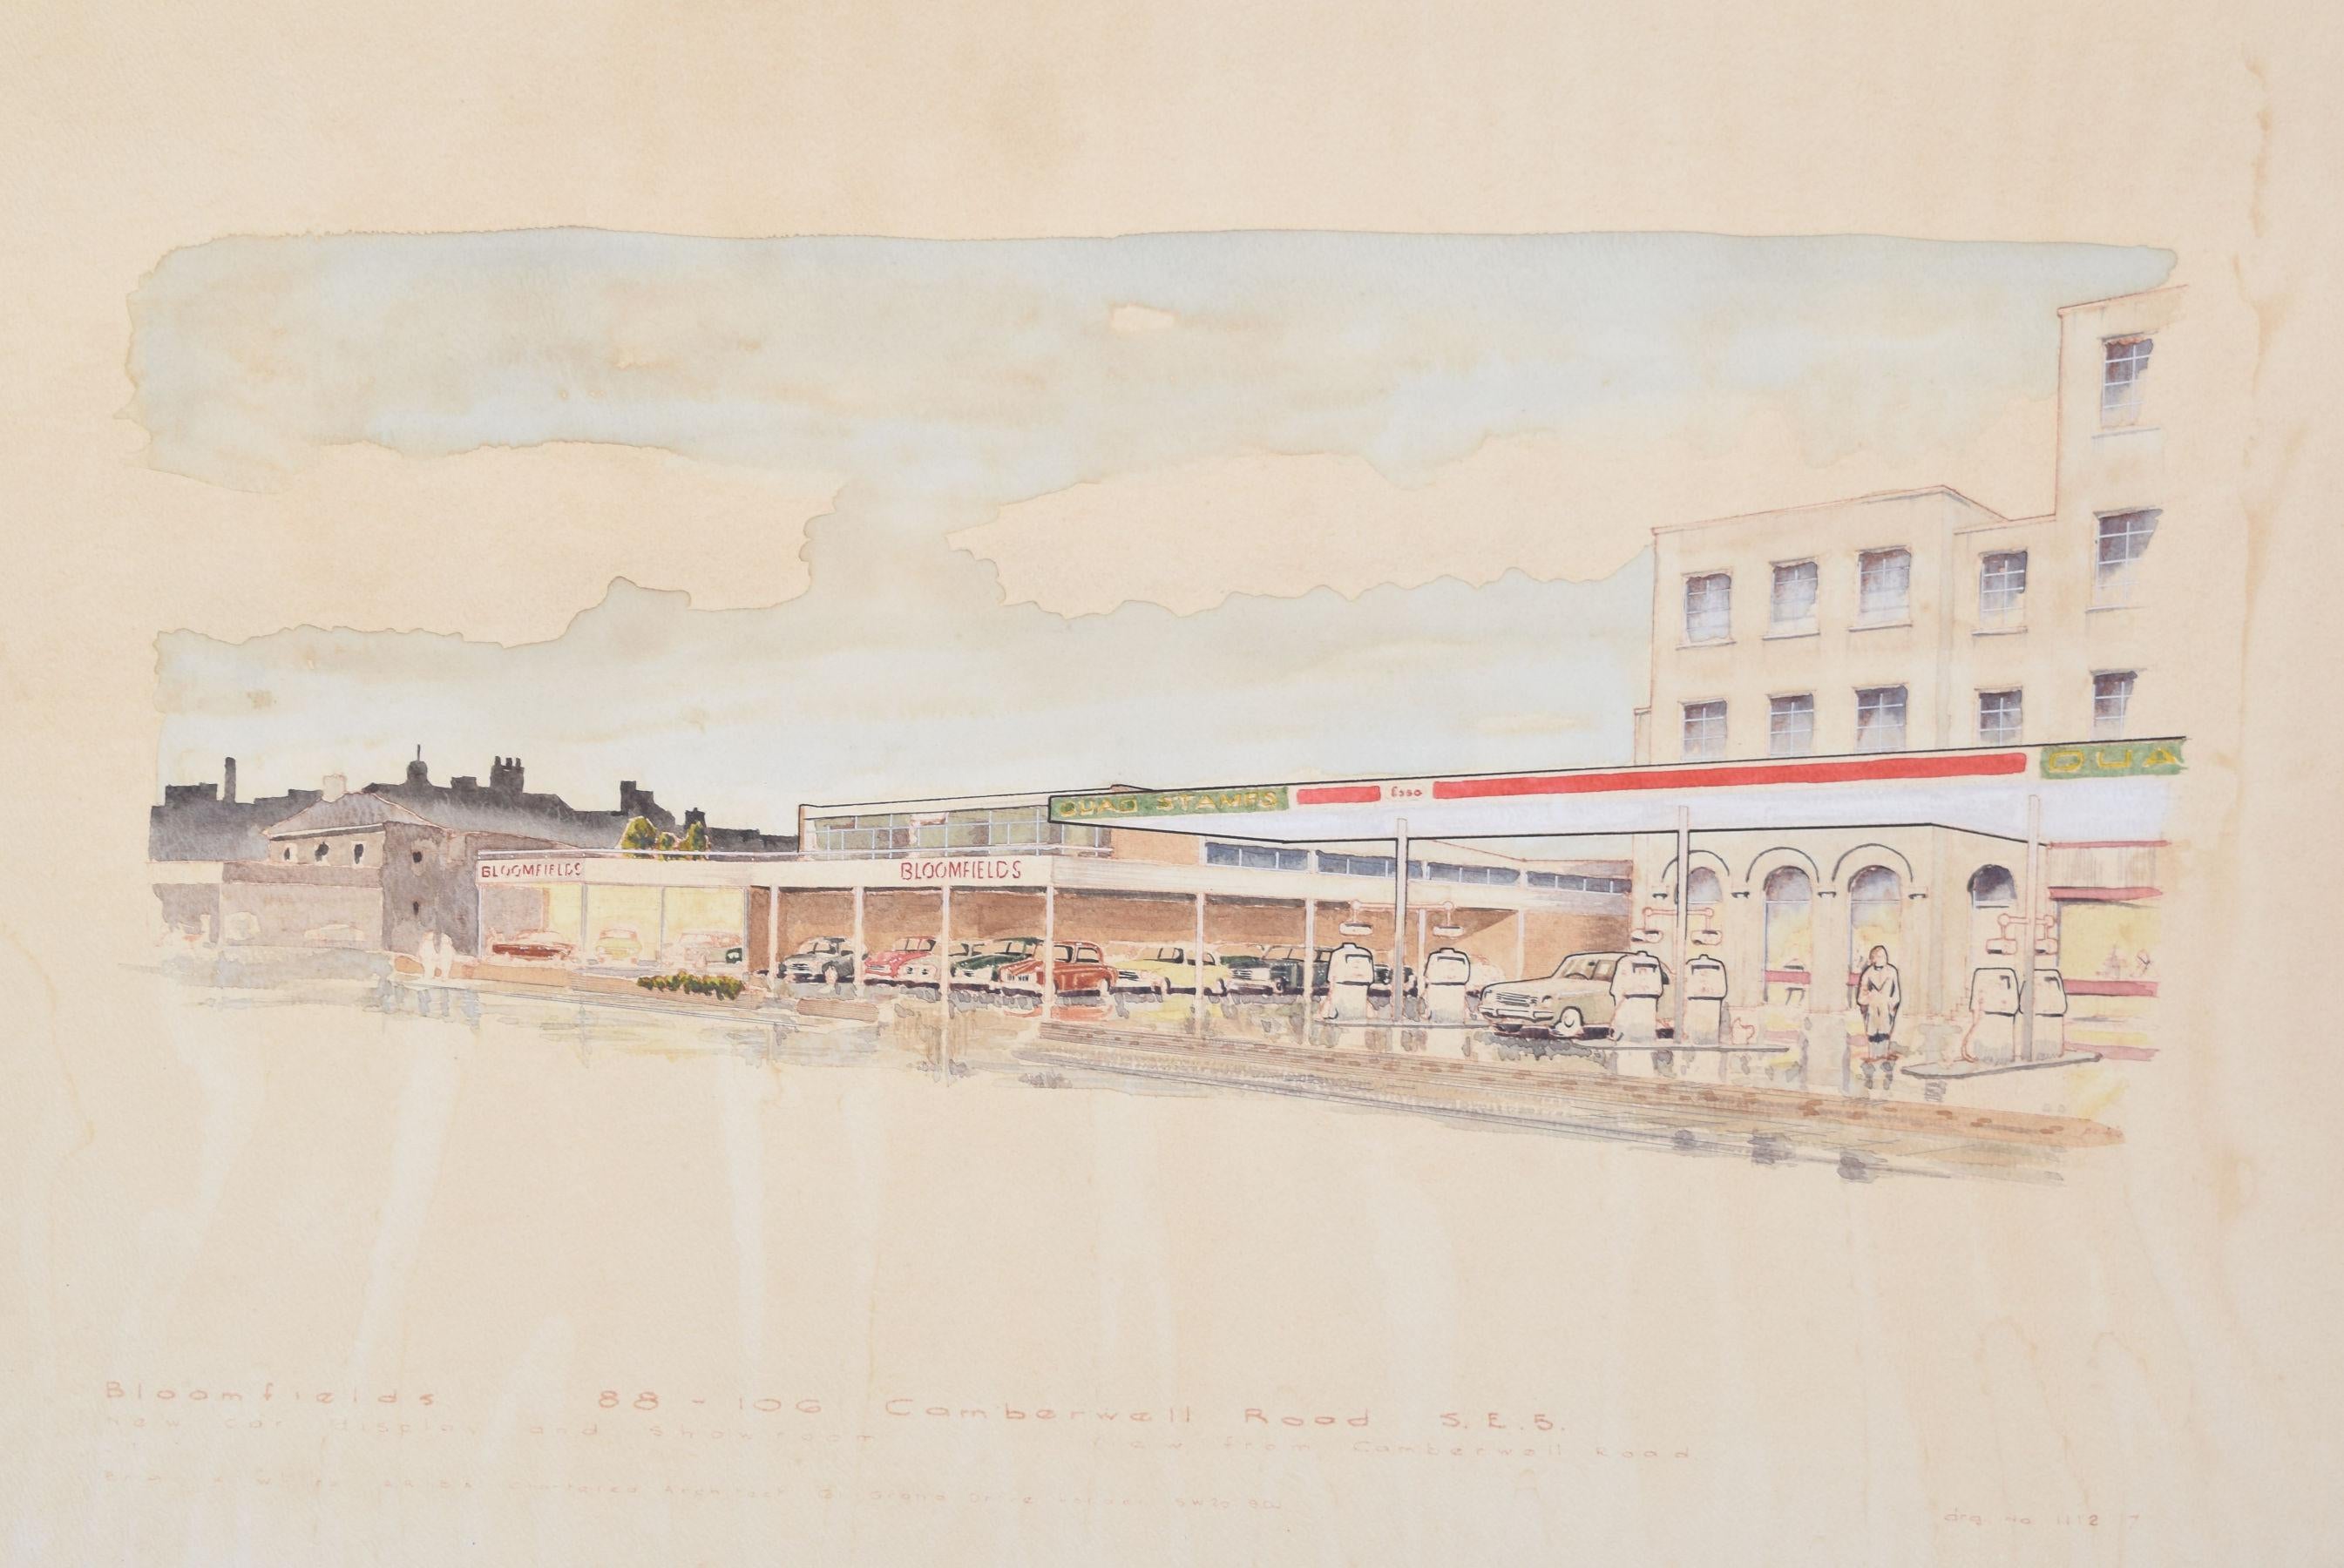 Bloomfields Car Showroom and Esso Garage, Camberwell Road, London SE5 painting - Art by Unknown